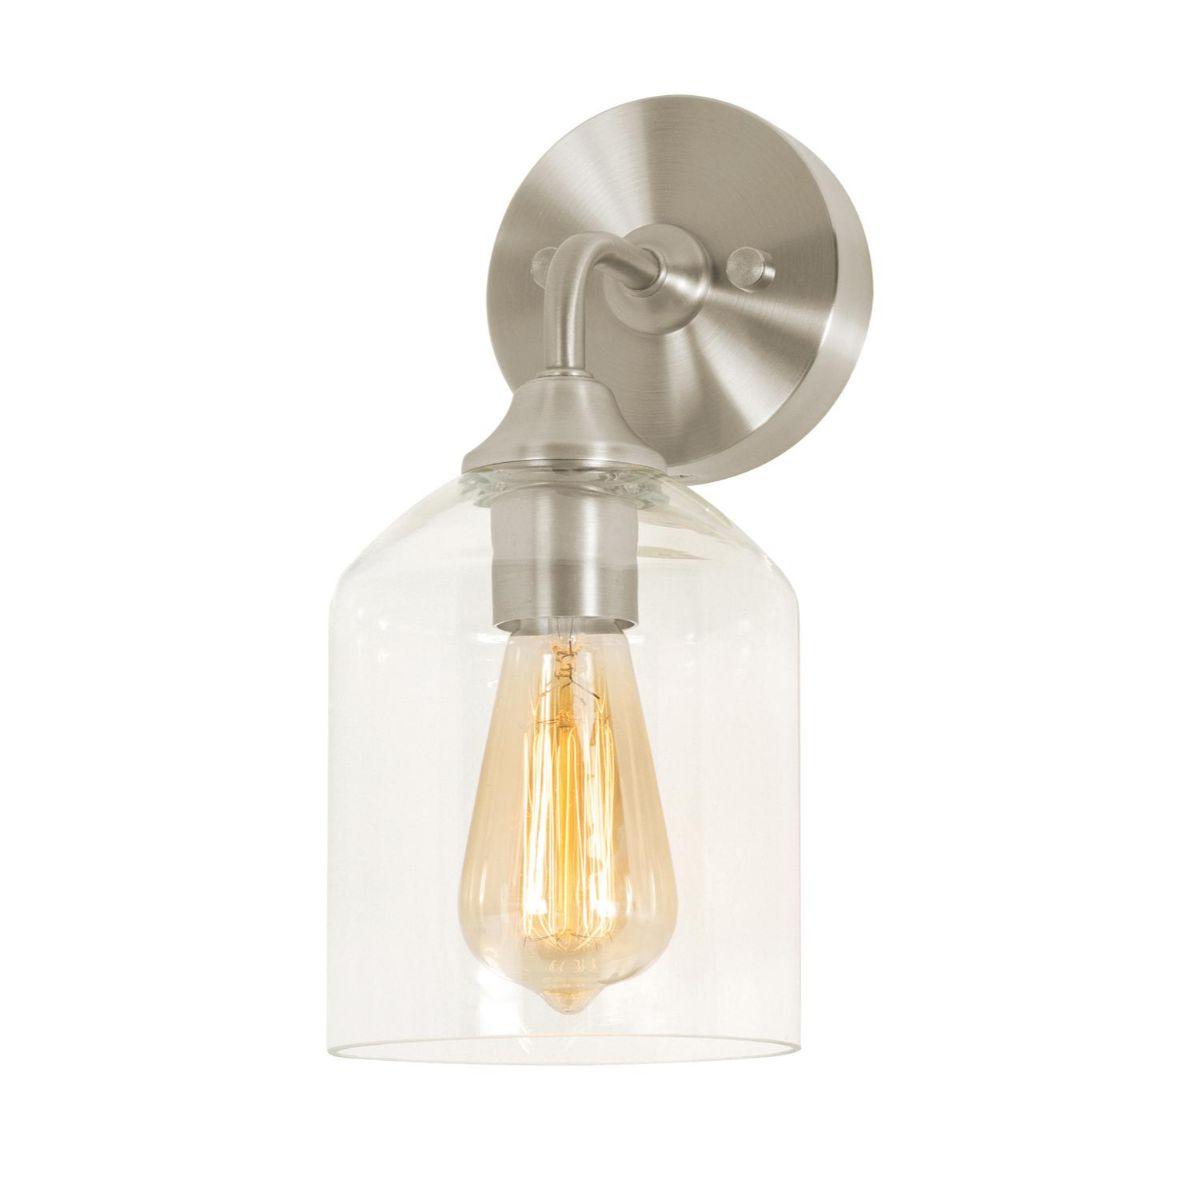 William 12 In. Armed Sconce